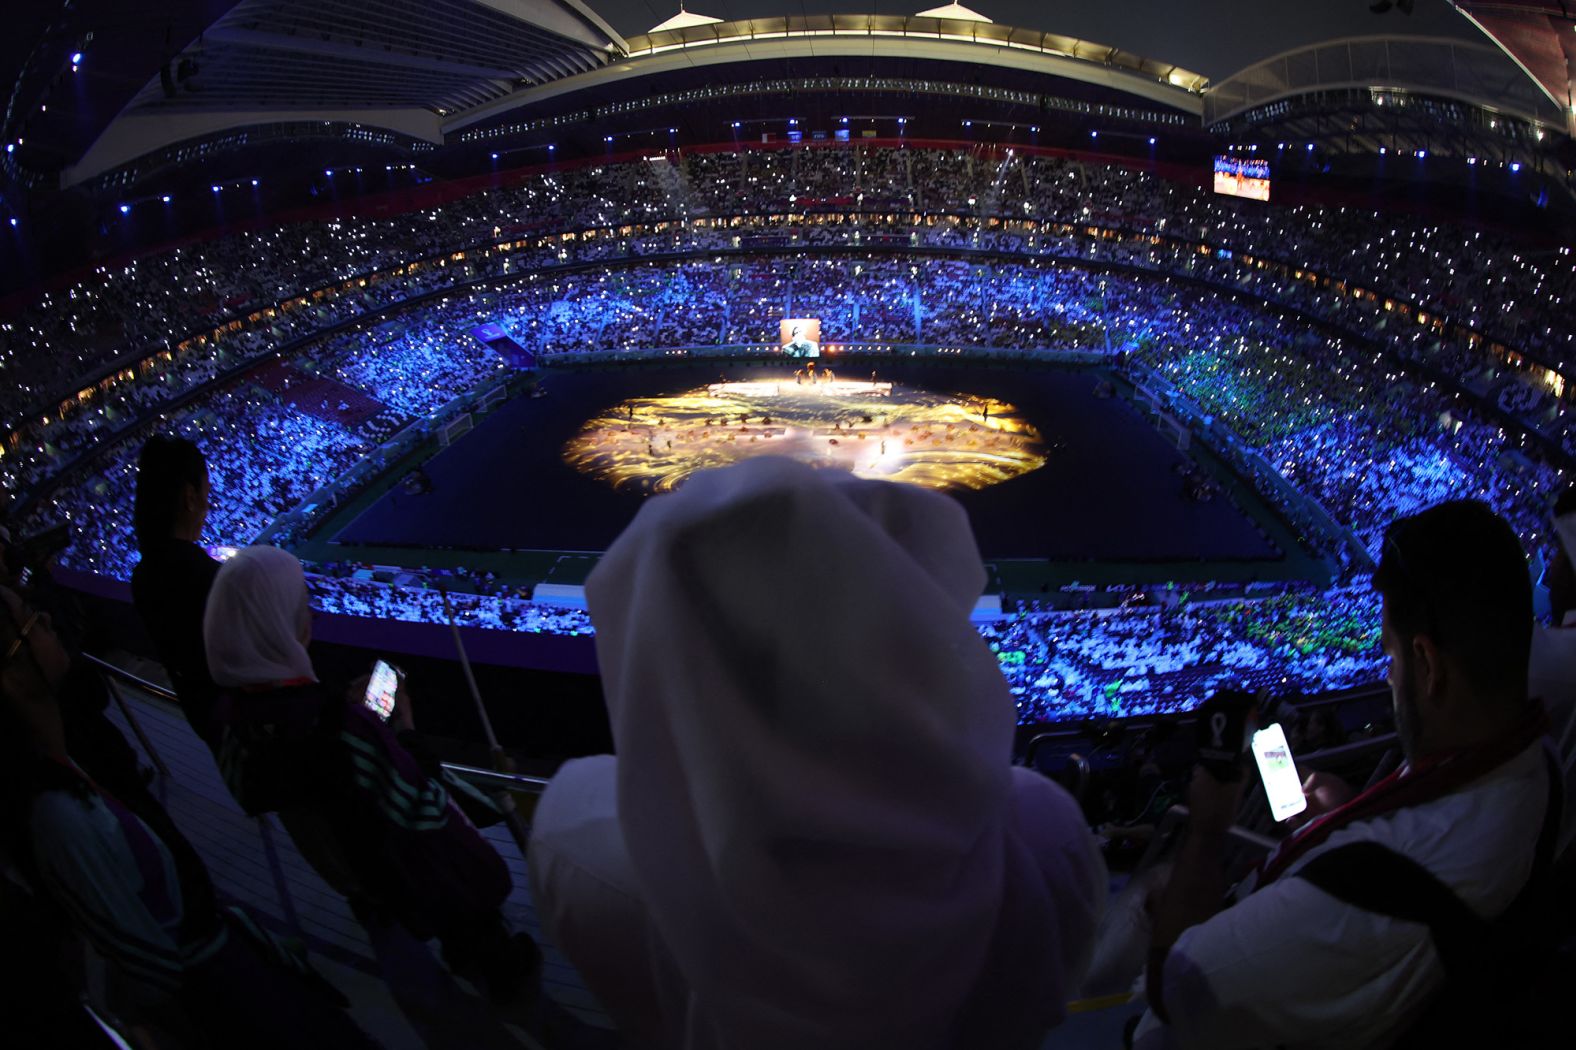 A view inside Al Bayt Stadium during the opening ceremony.